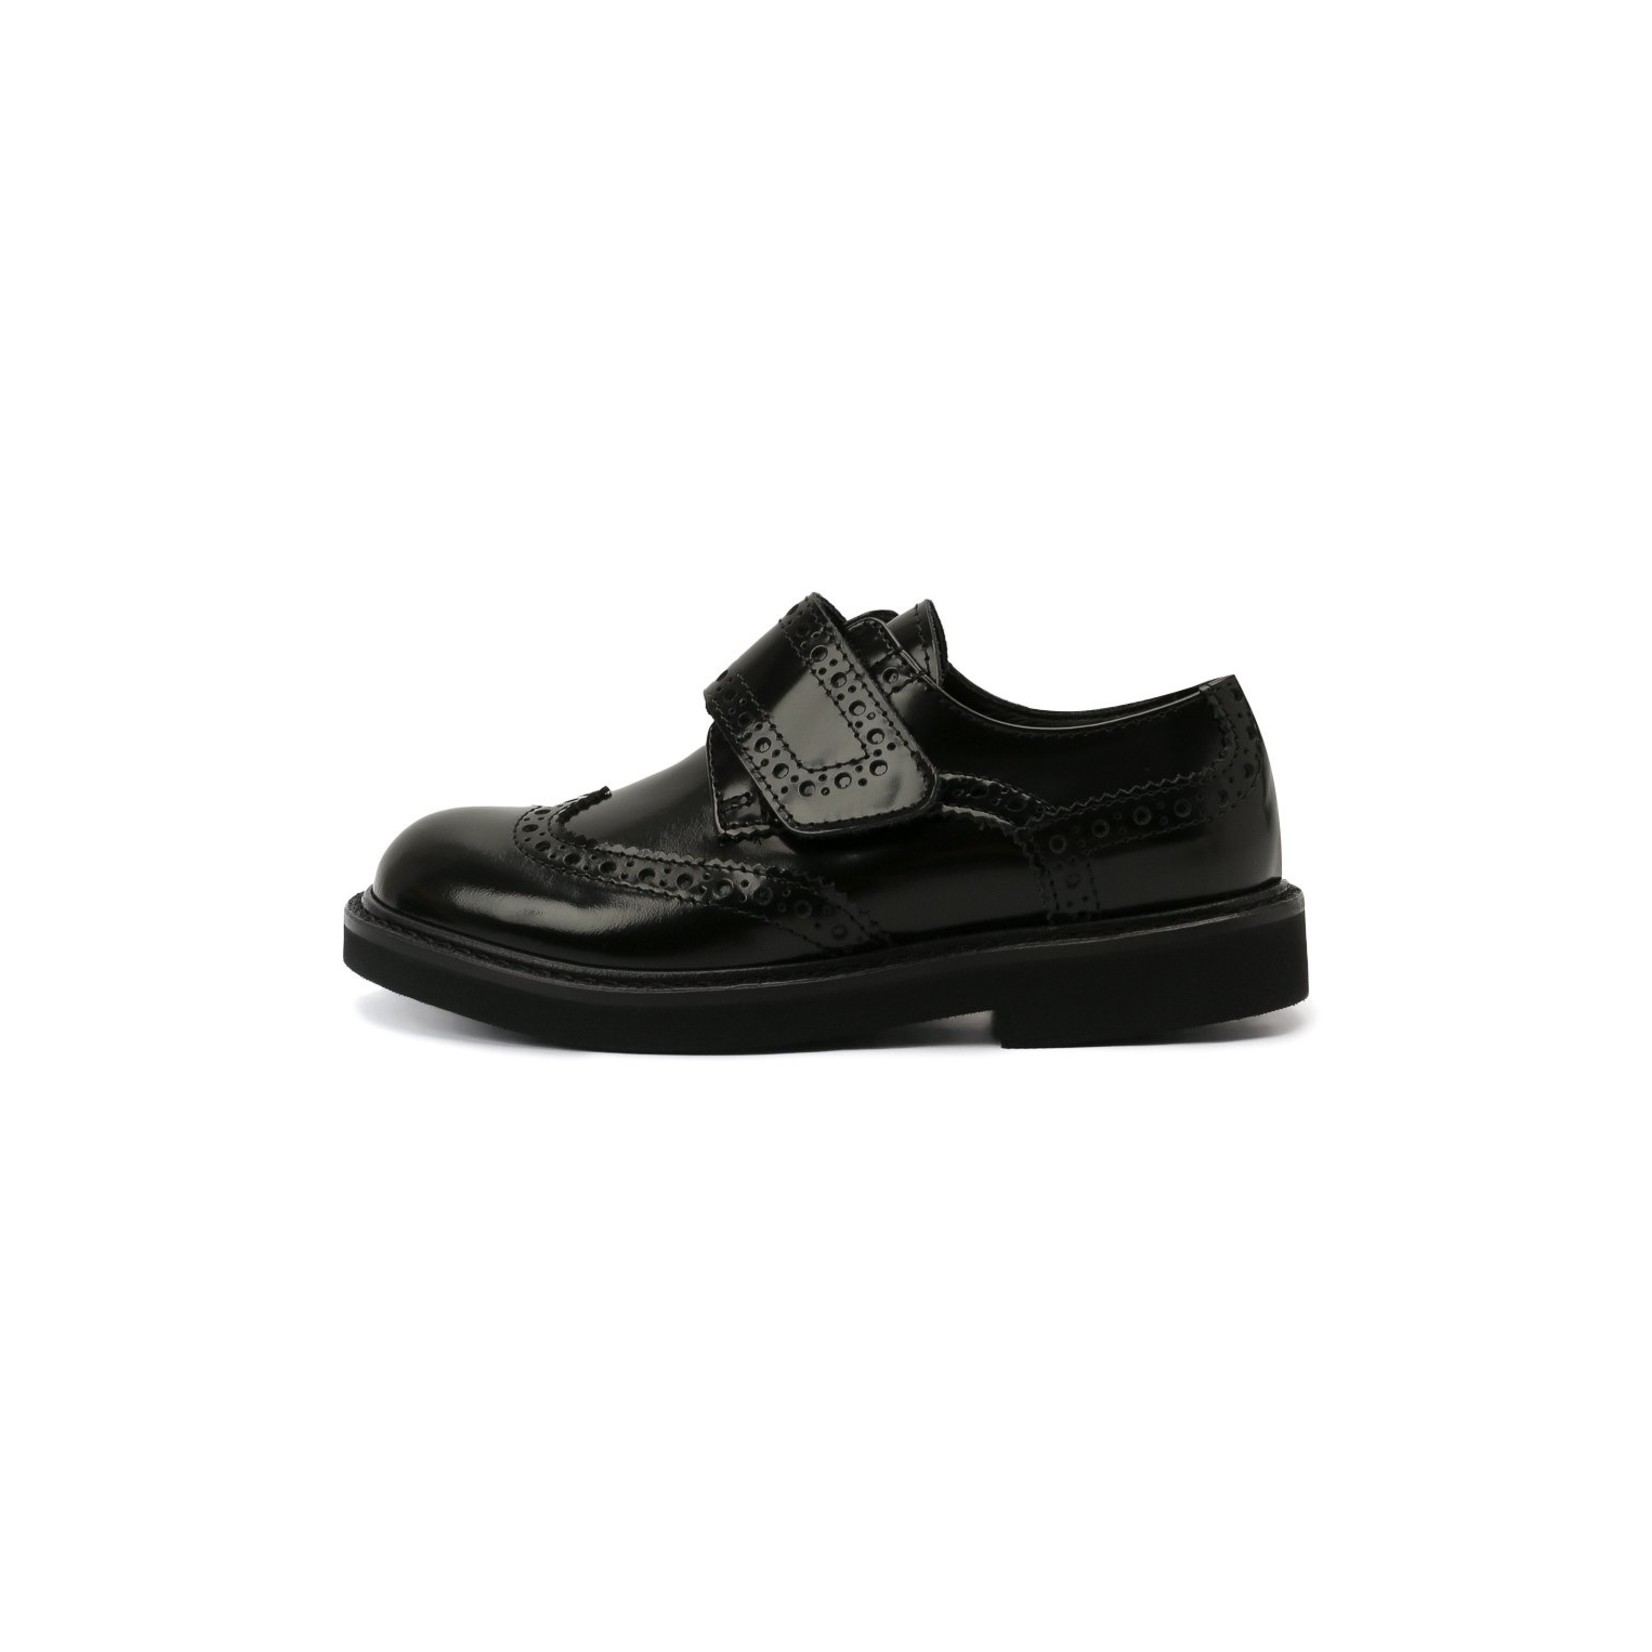 Montelpare Tradition Montelpare Tradition - perforated touch strap brogues